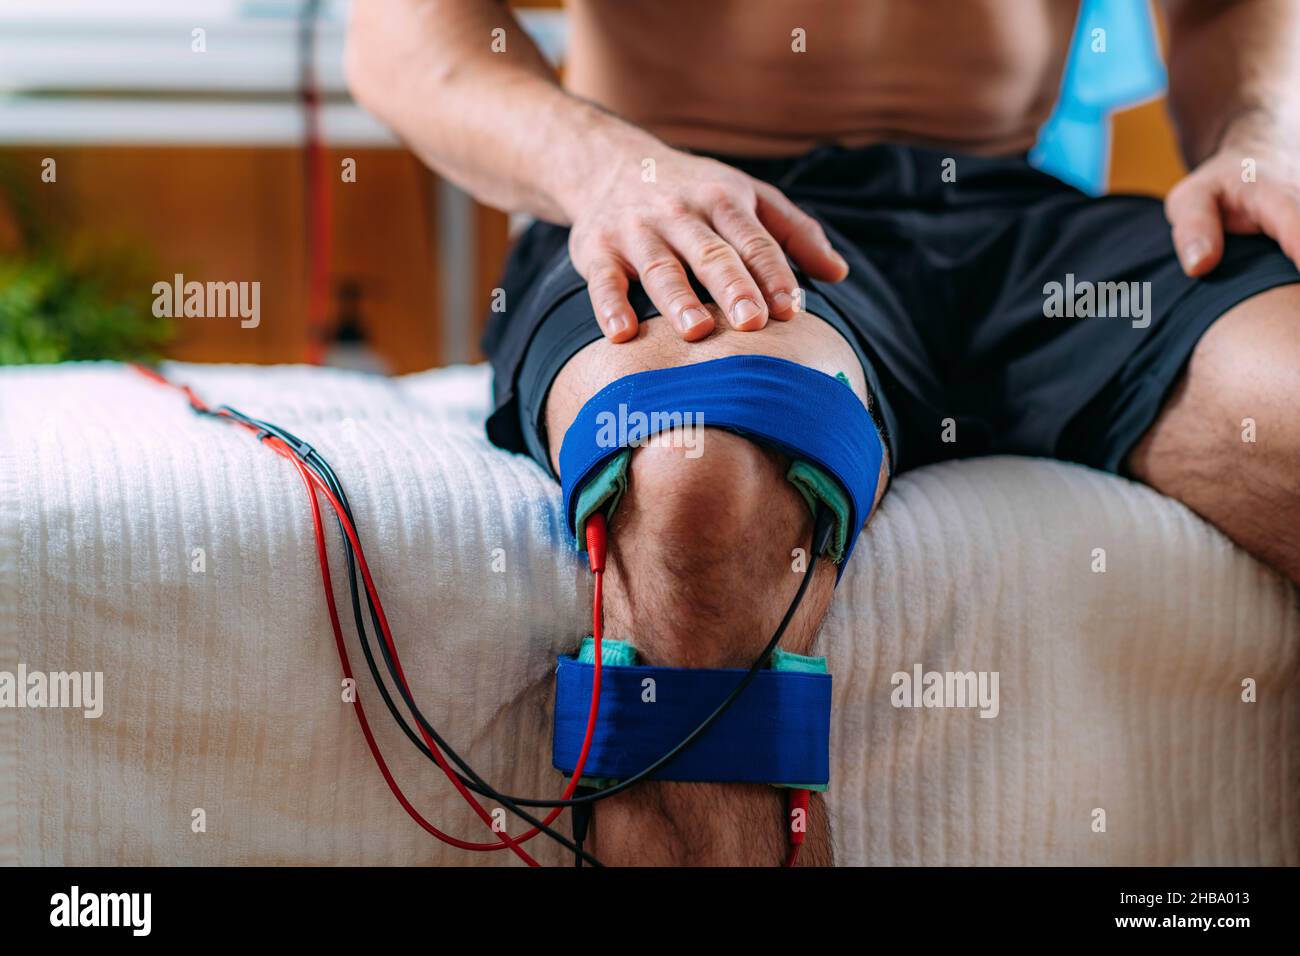 https://c8.alamy.com/comp/2HBA013/tens-transcutaneous-electrical-nerve-stimulation-knee-physical-therapy-2HBA013.jpg